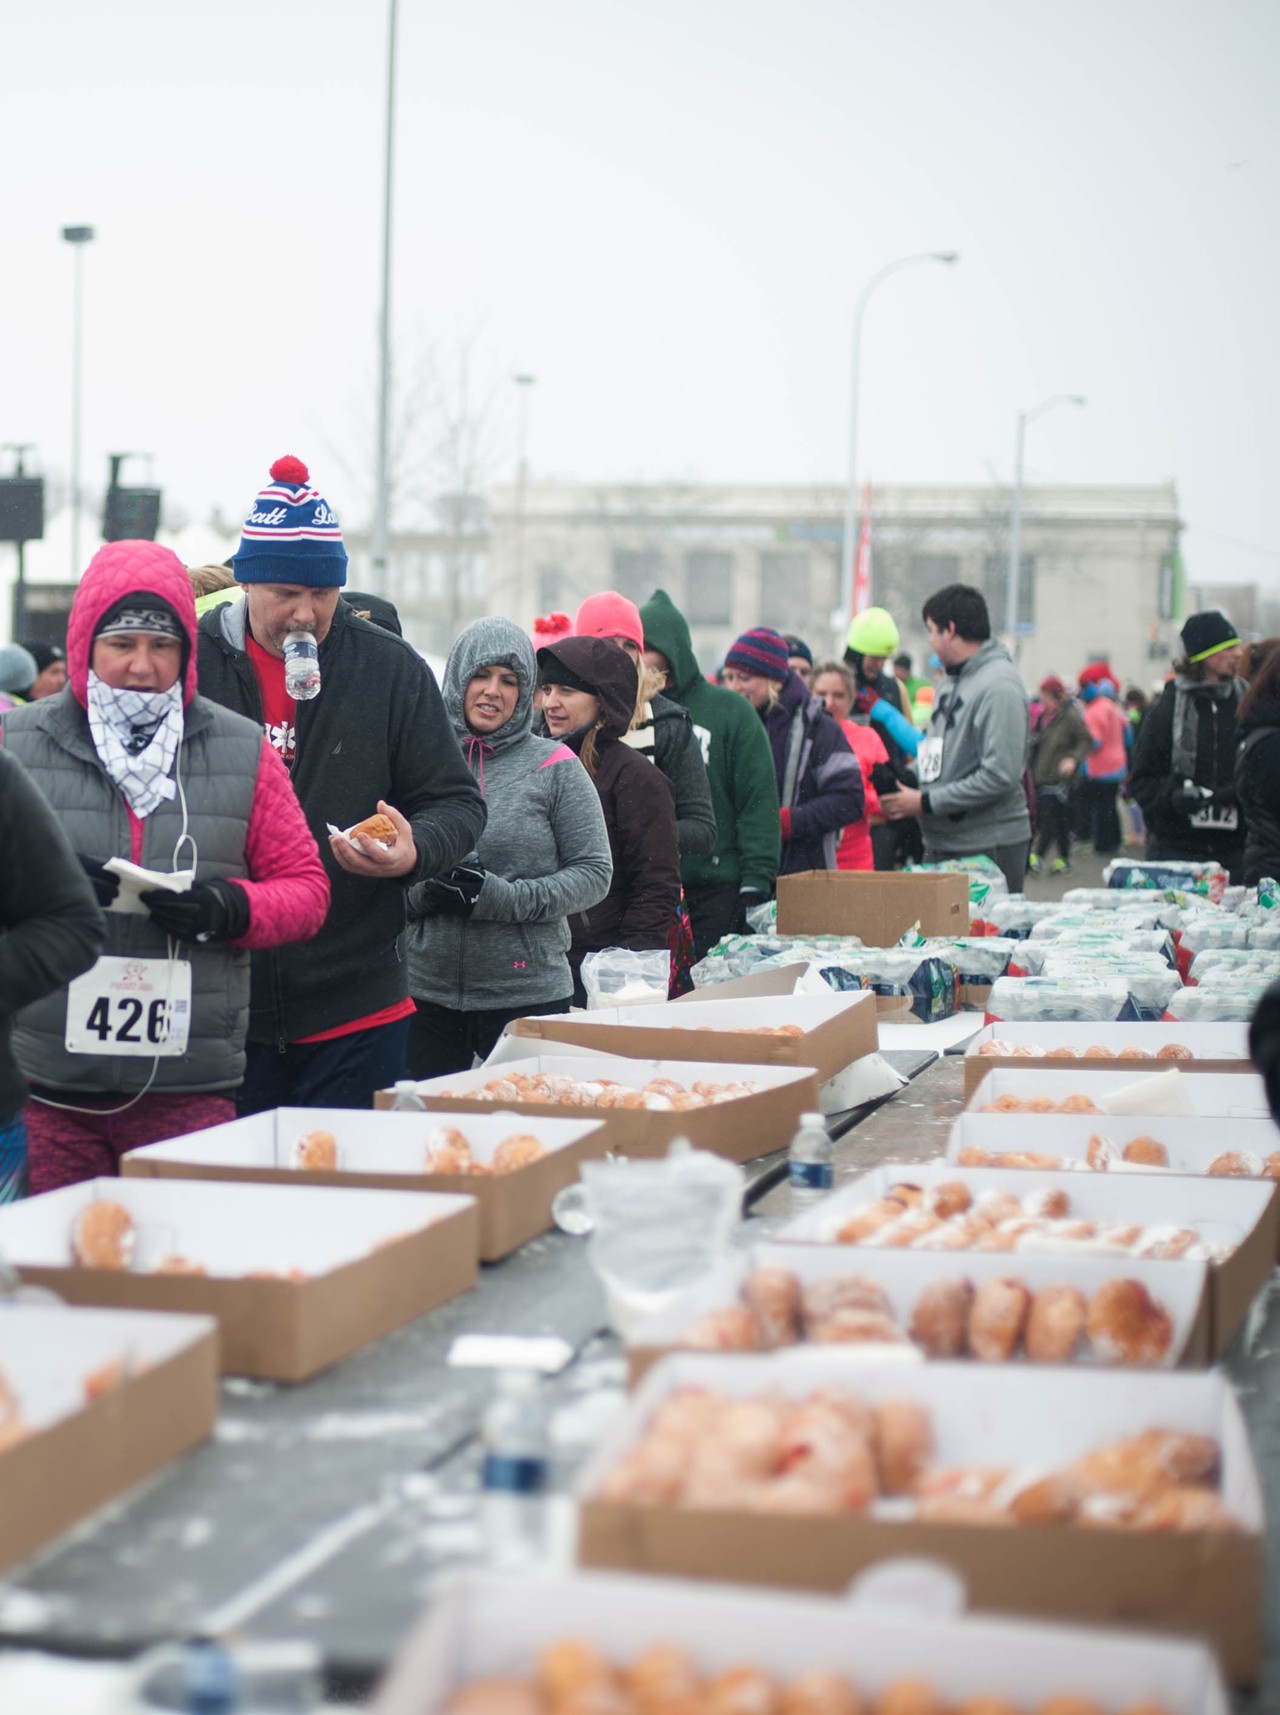 Saturday 2/6 Paczki Run -- Goodbye Christmas, hello Easter. Ring in the new holiday season with a paczki, also known as a delicious, calorie-filled jelly doughnut. Calorie counters can indulge in that jelly-filled goodness guilt free by participating in Hamtramck&#146;s annual Paczki Run. The yearly 5K takes place a few days before Paczki Day. Motivation to finish the race can be found in the paczkis, beer, and T-shirt racers receive upon completing the 2-square-mile run. Be one of the first three finishers, and you&#146;ll get a medal to show off to your family and friends. In-person registration begins at 8 a.m.; runs begins at 10 a.m.; corner of Joseph Campau and Holbrook $45